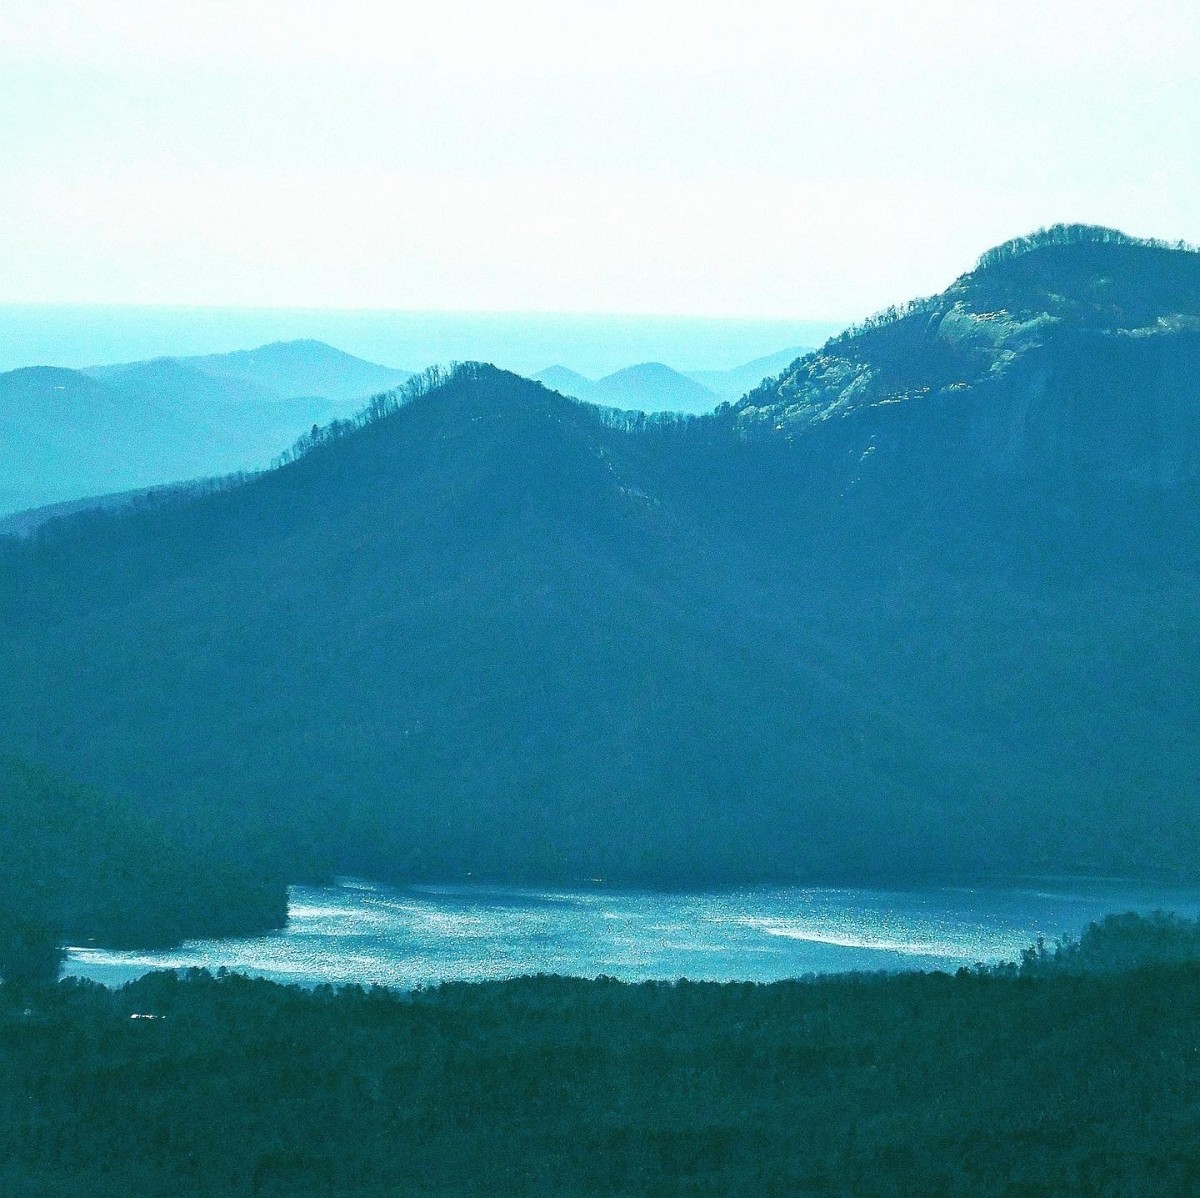 The Table Rock Reservoir seen from the Caesar's Head Overlook.